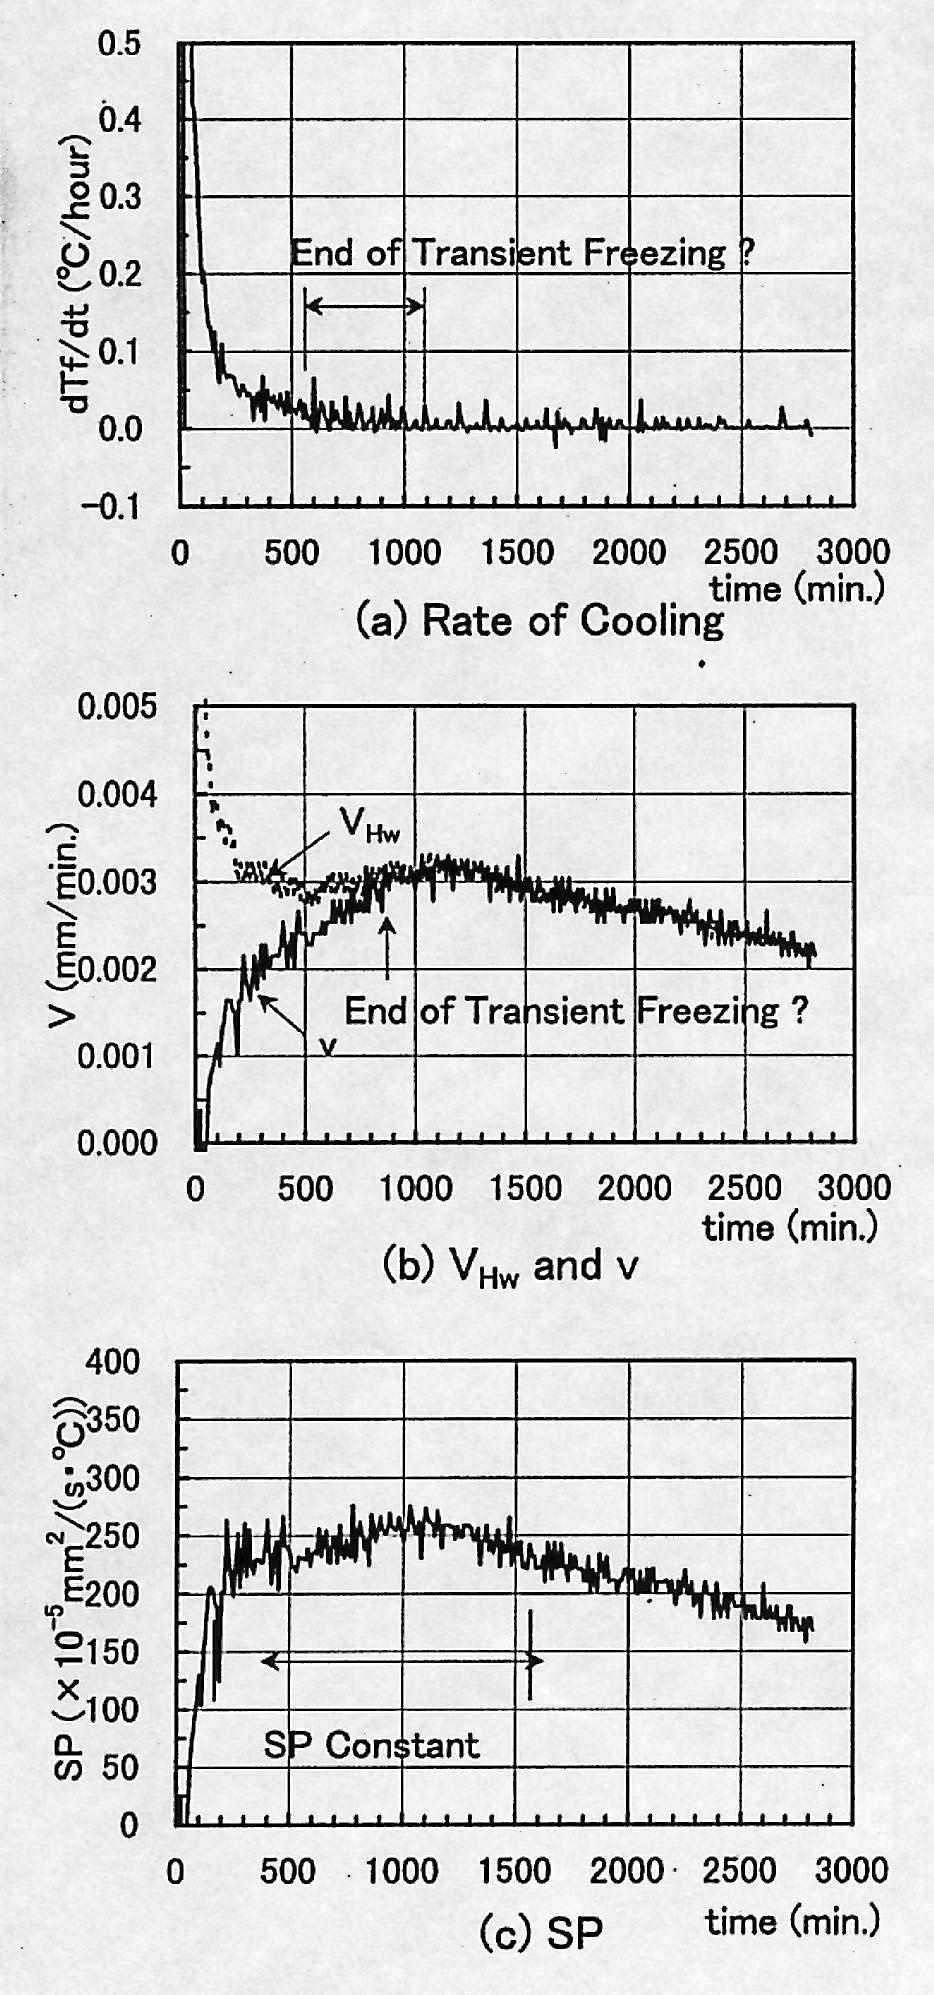 from Figure 5a. The cooling rate indicates that the end of transient freezing was between 600 and 1100 min and SP was estimated as 0.0024 to 0.0025 mm 2 /(s C).